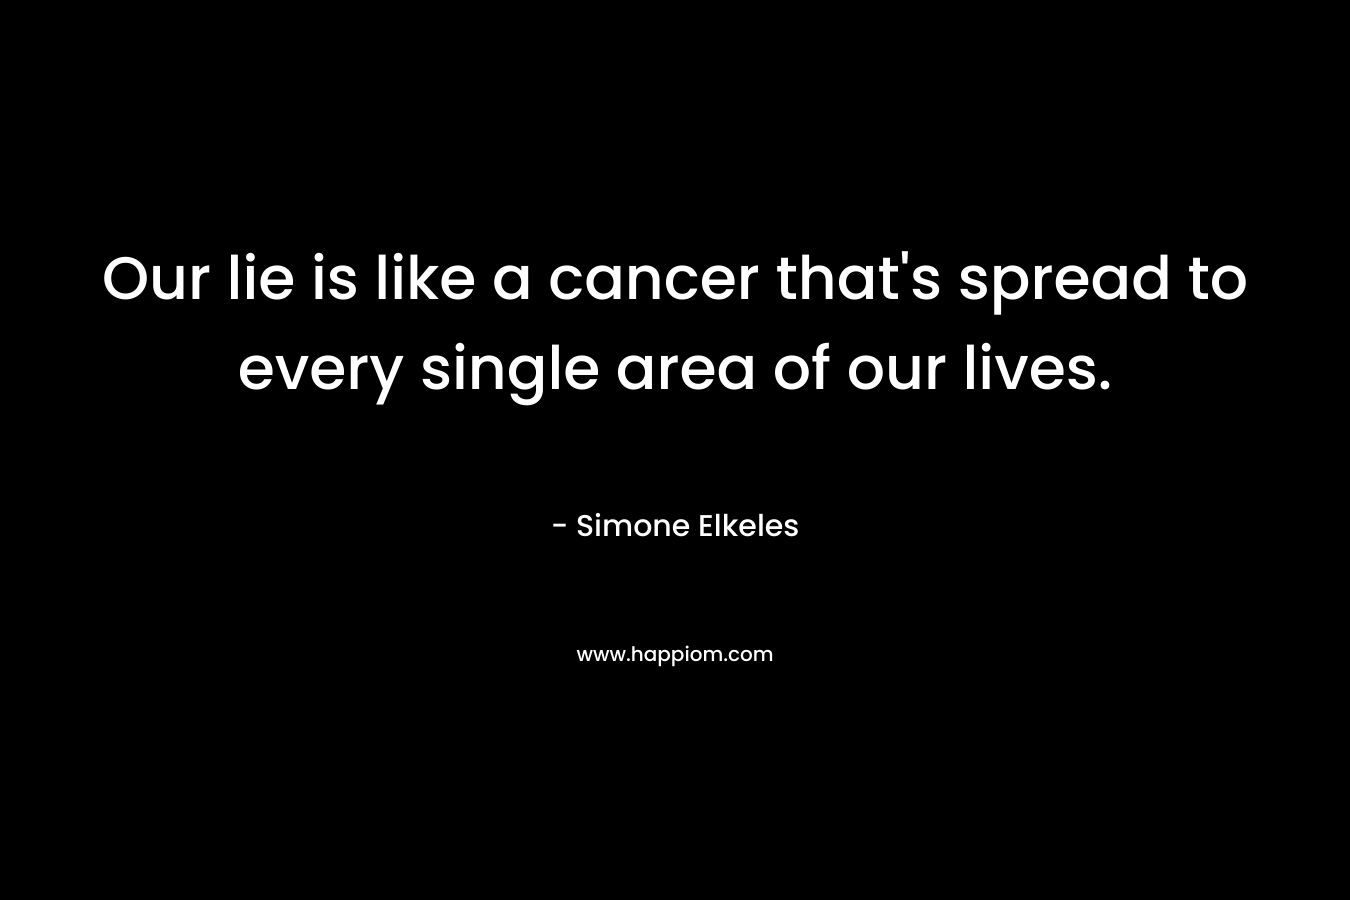 Our lie is like a cancer that’s spread to every single area of our lives. – Simone Elkeles